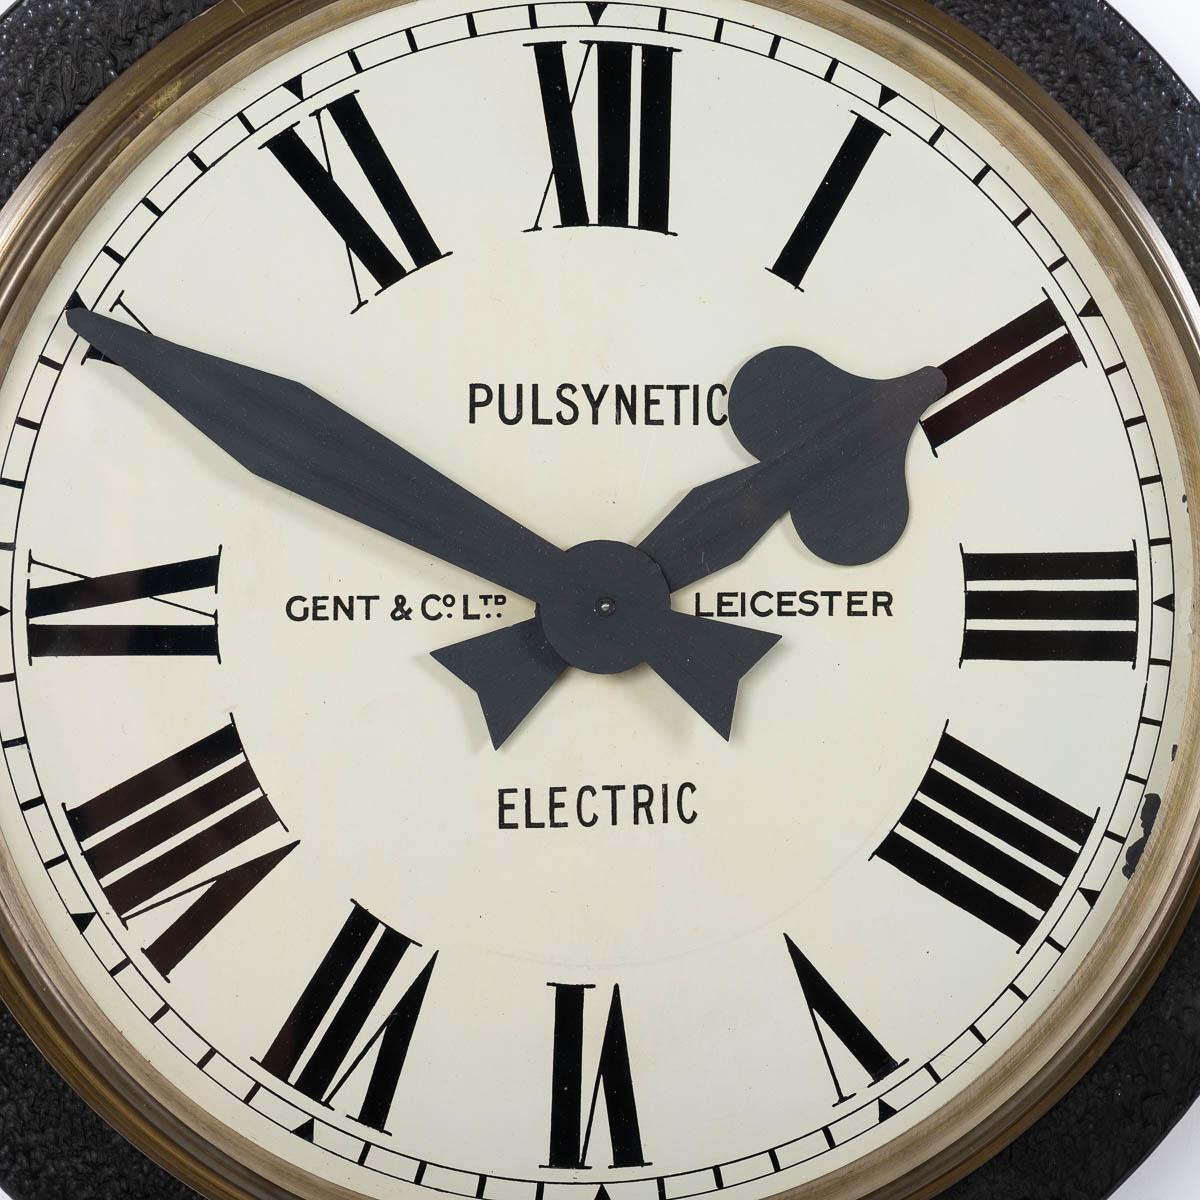 British Large Reclaimed Electric Railway Wall Clock By Gent & Co Ltd Leicester